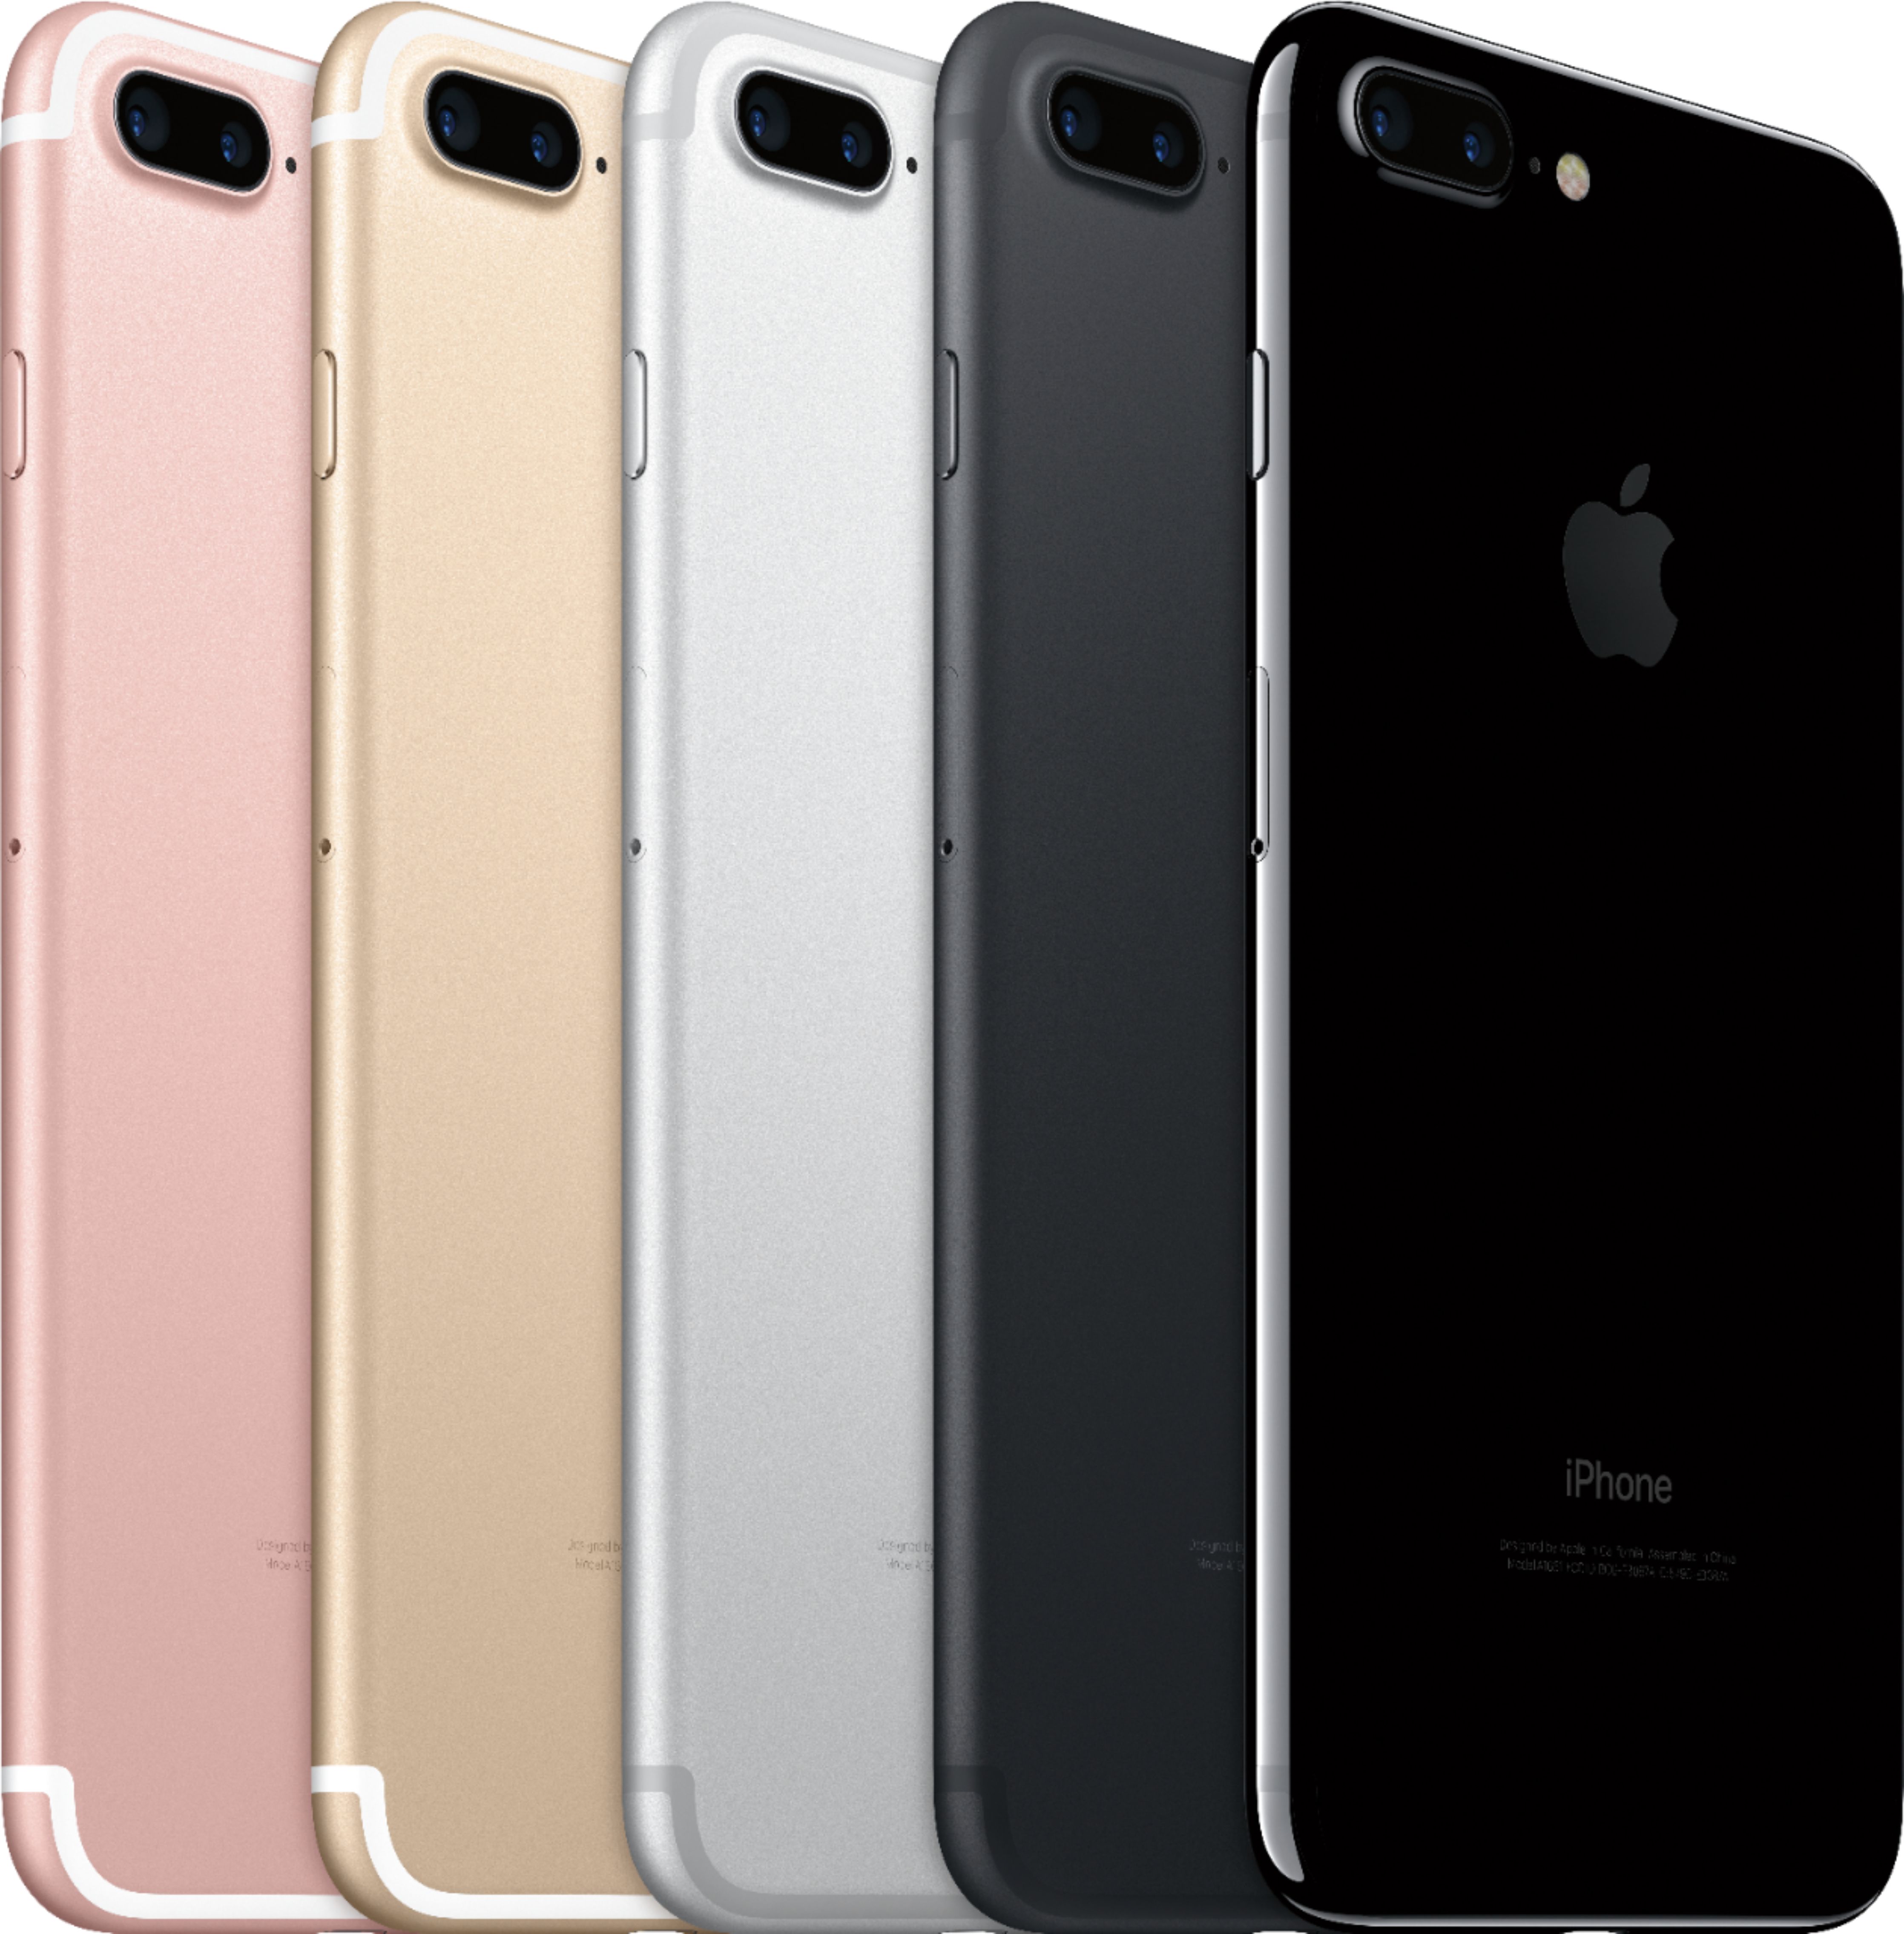 where can i get a iphone 7 plus for cheap